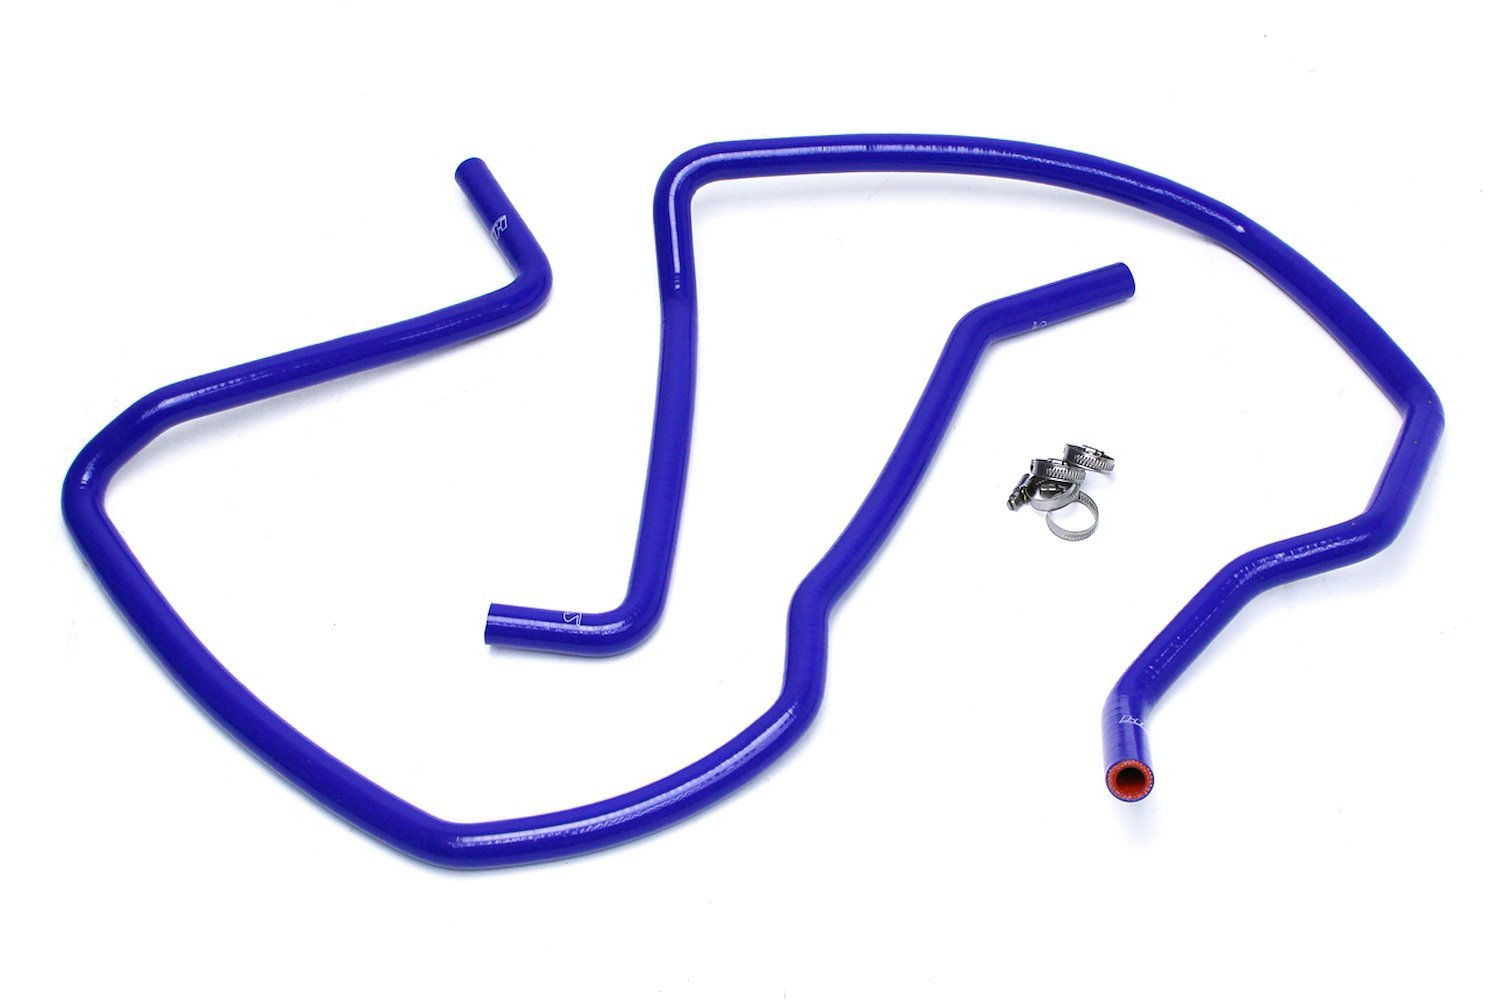 57-1498H-BLUE Heater Hose Kit, High-Temp 3-Ply Reinforced Silicone, Replace OEM Rubber Heater Coolant Hoses